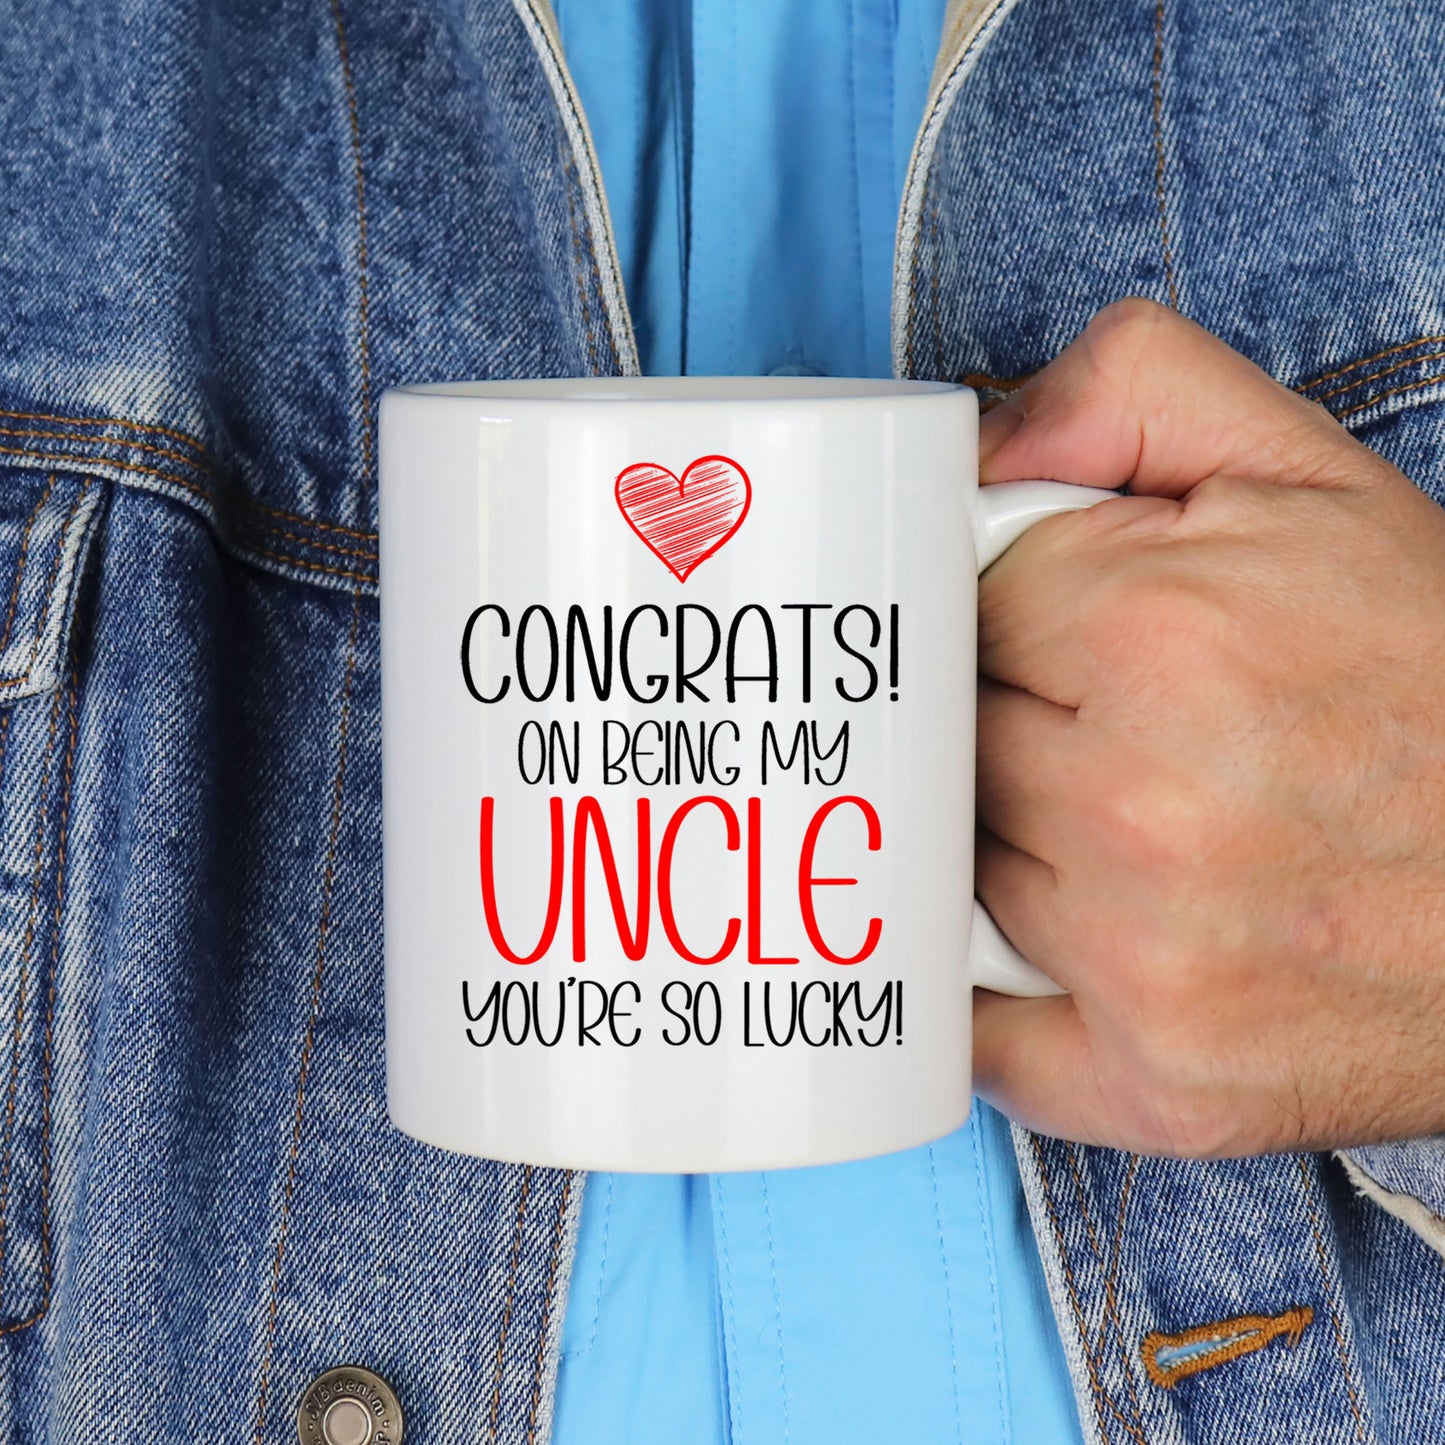 Congrats On Being My Uncle Mug and/or Coaster Gift  - Always Looking Good -   